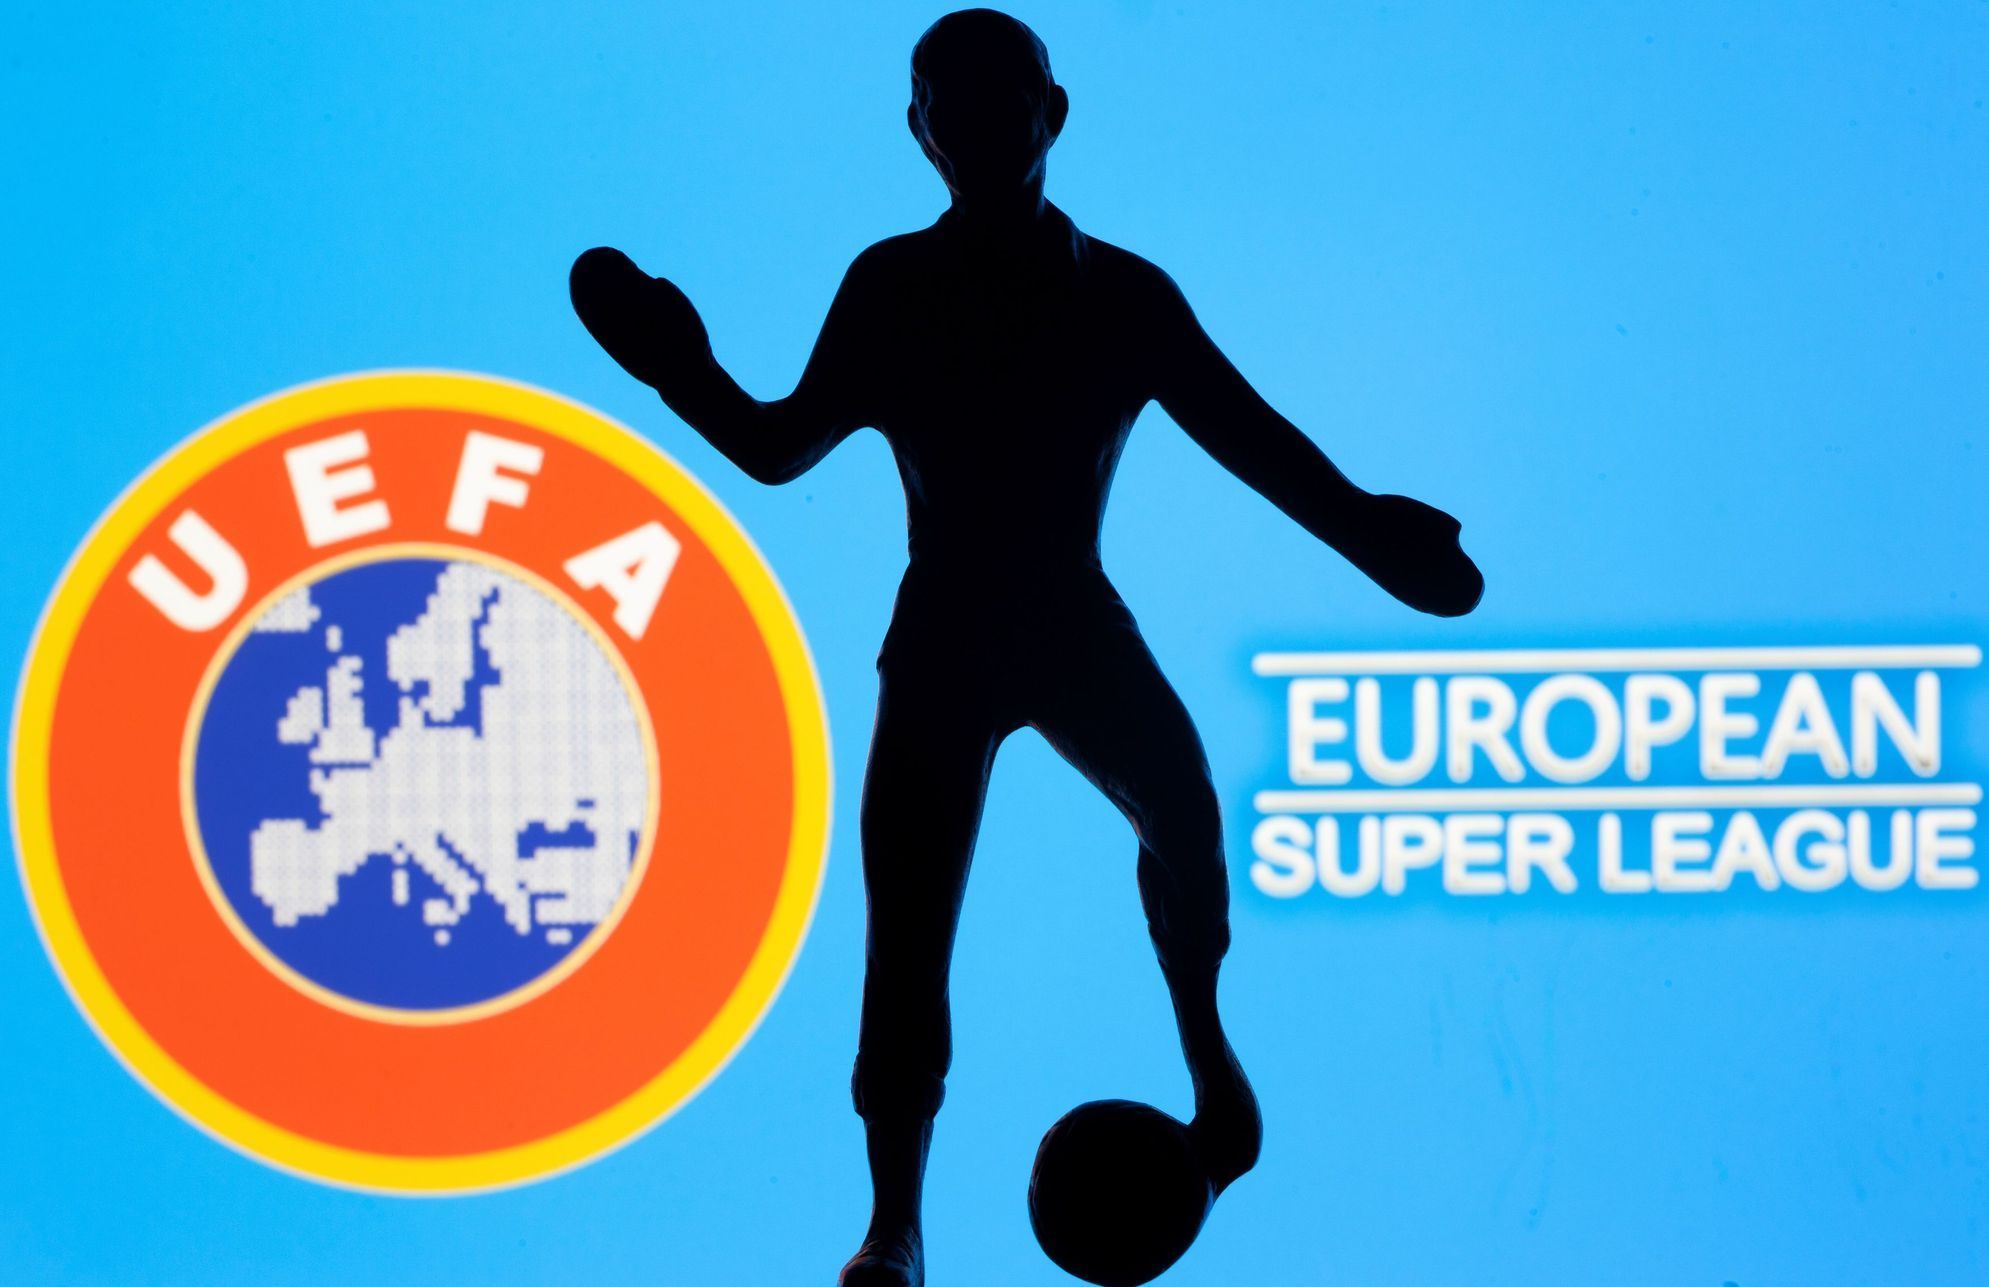 A metal figure of a football player with a ball is seen in front of the words "European Super League" and the UEFA logo in this illustration